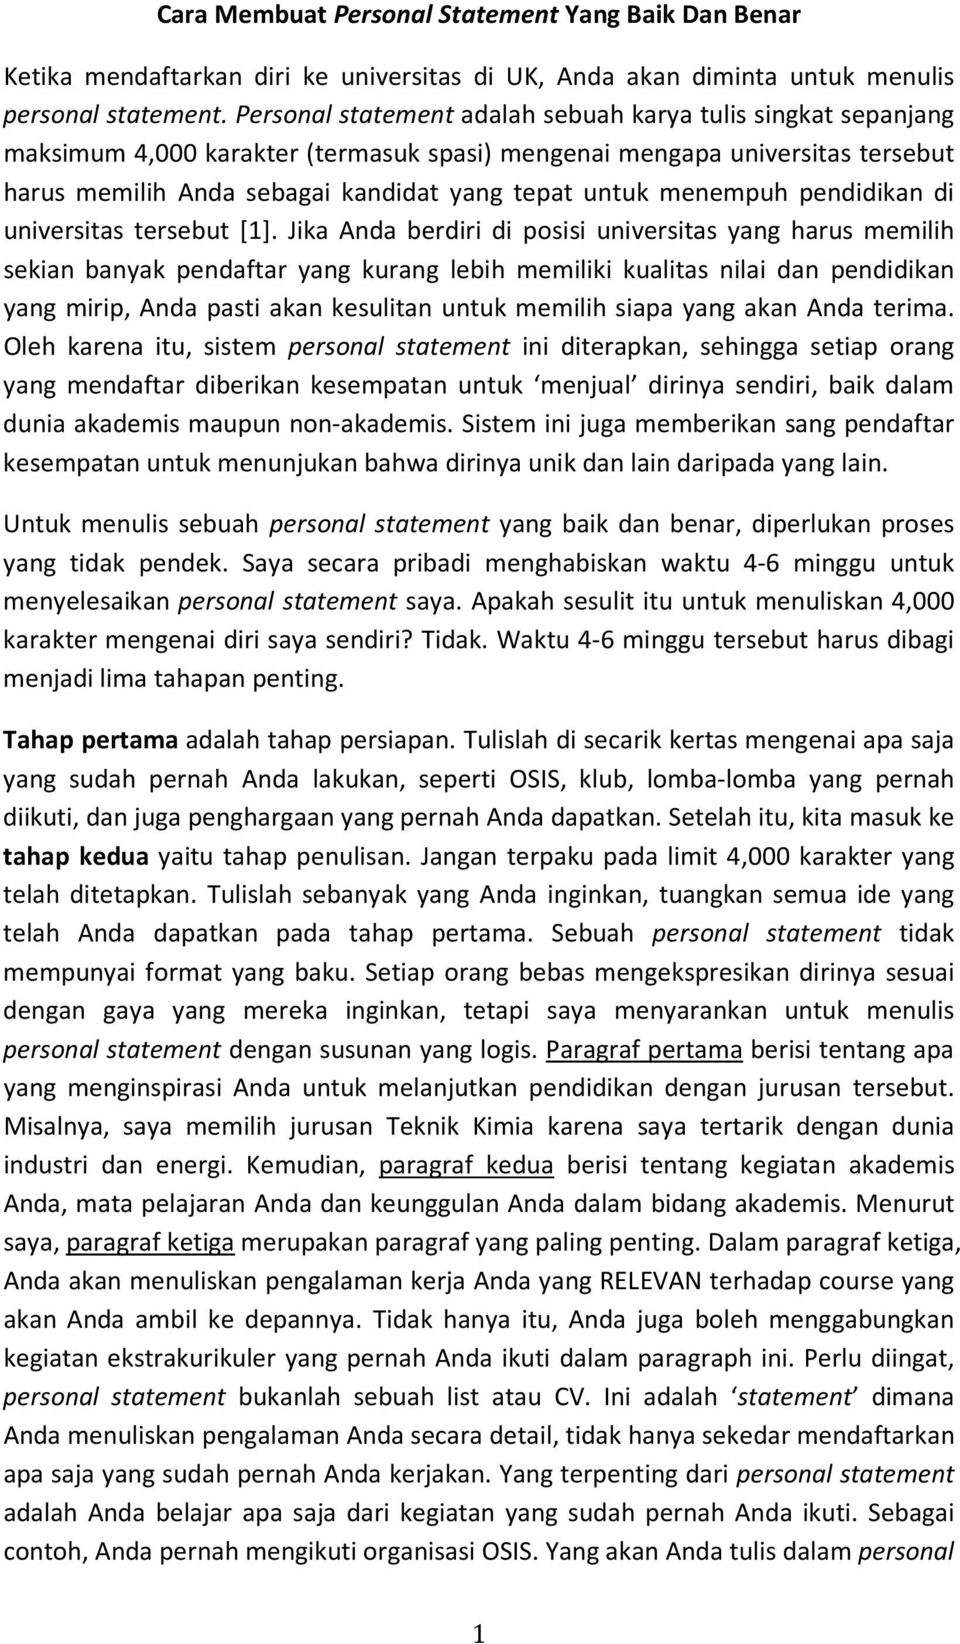 Detail Personal Statement Contoh Nomer 11